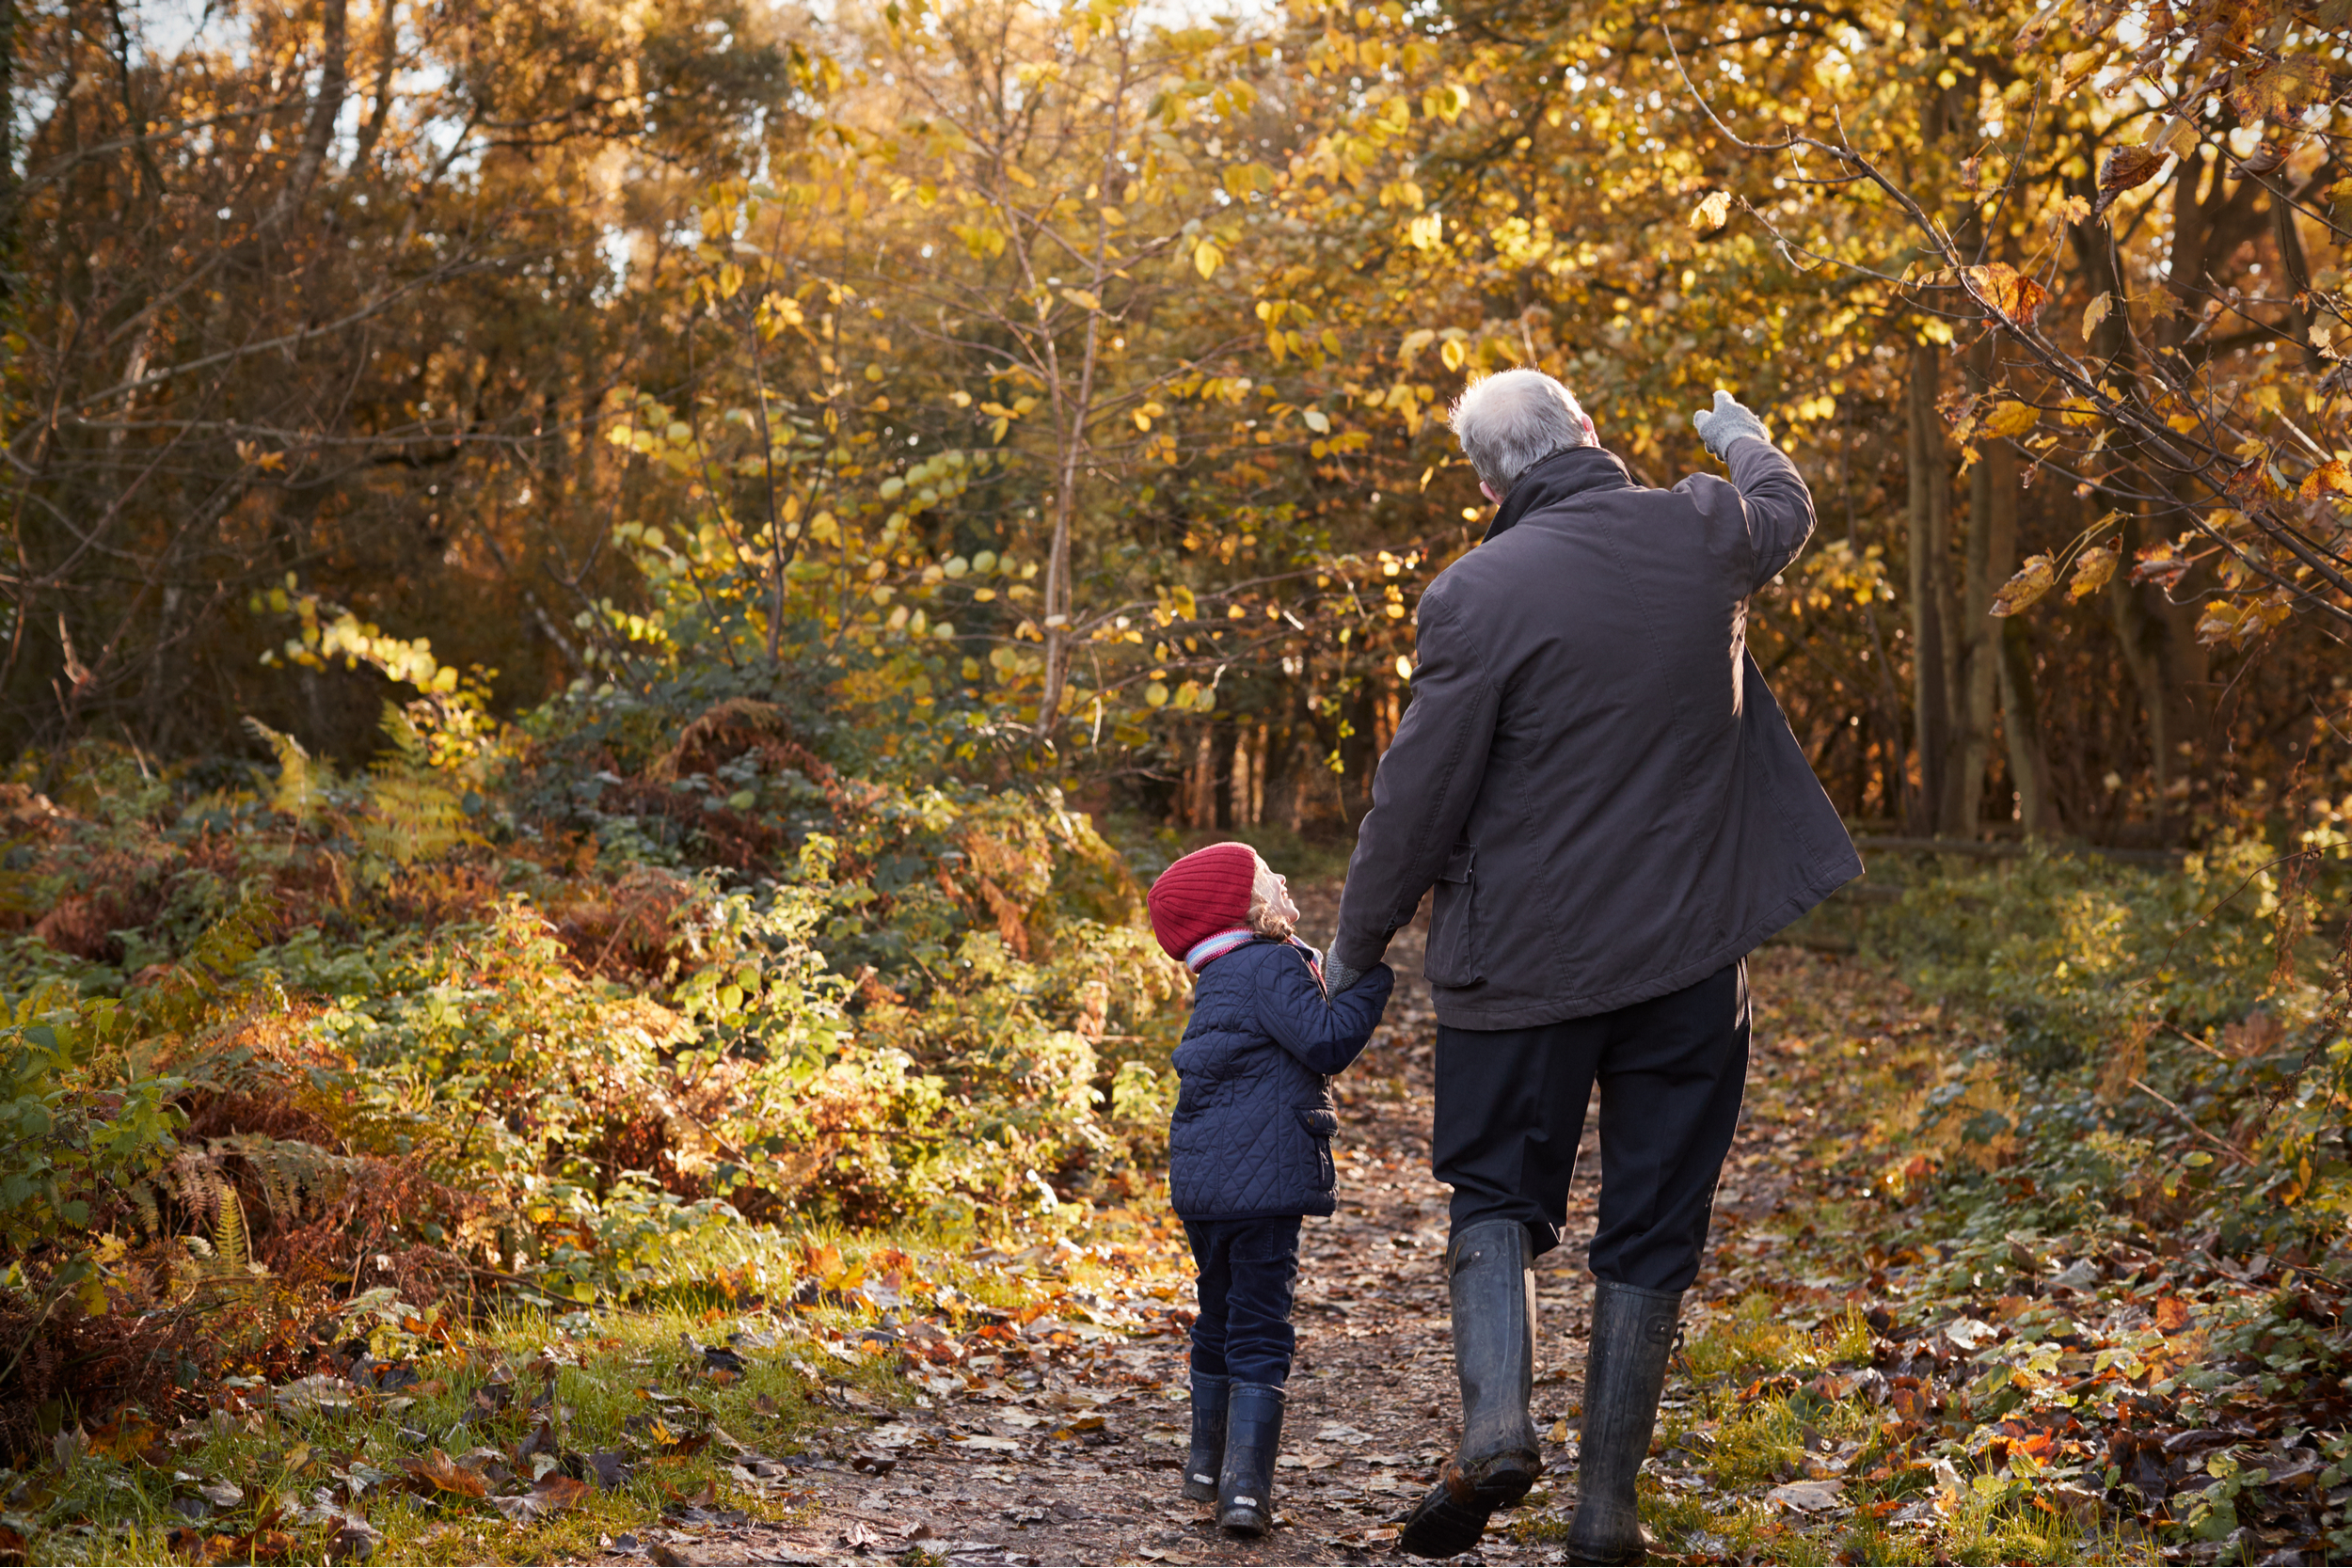 A grandfather and granddaughter on an autumn walk.